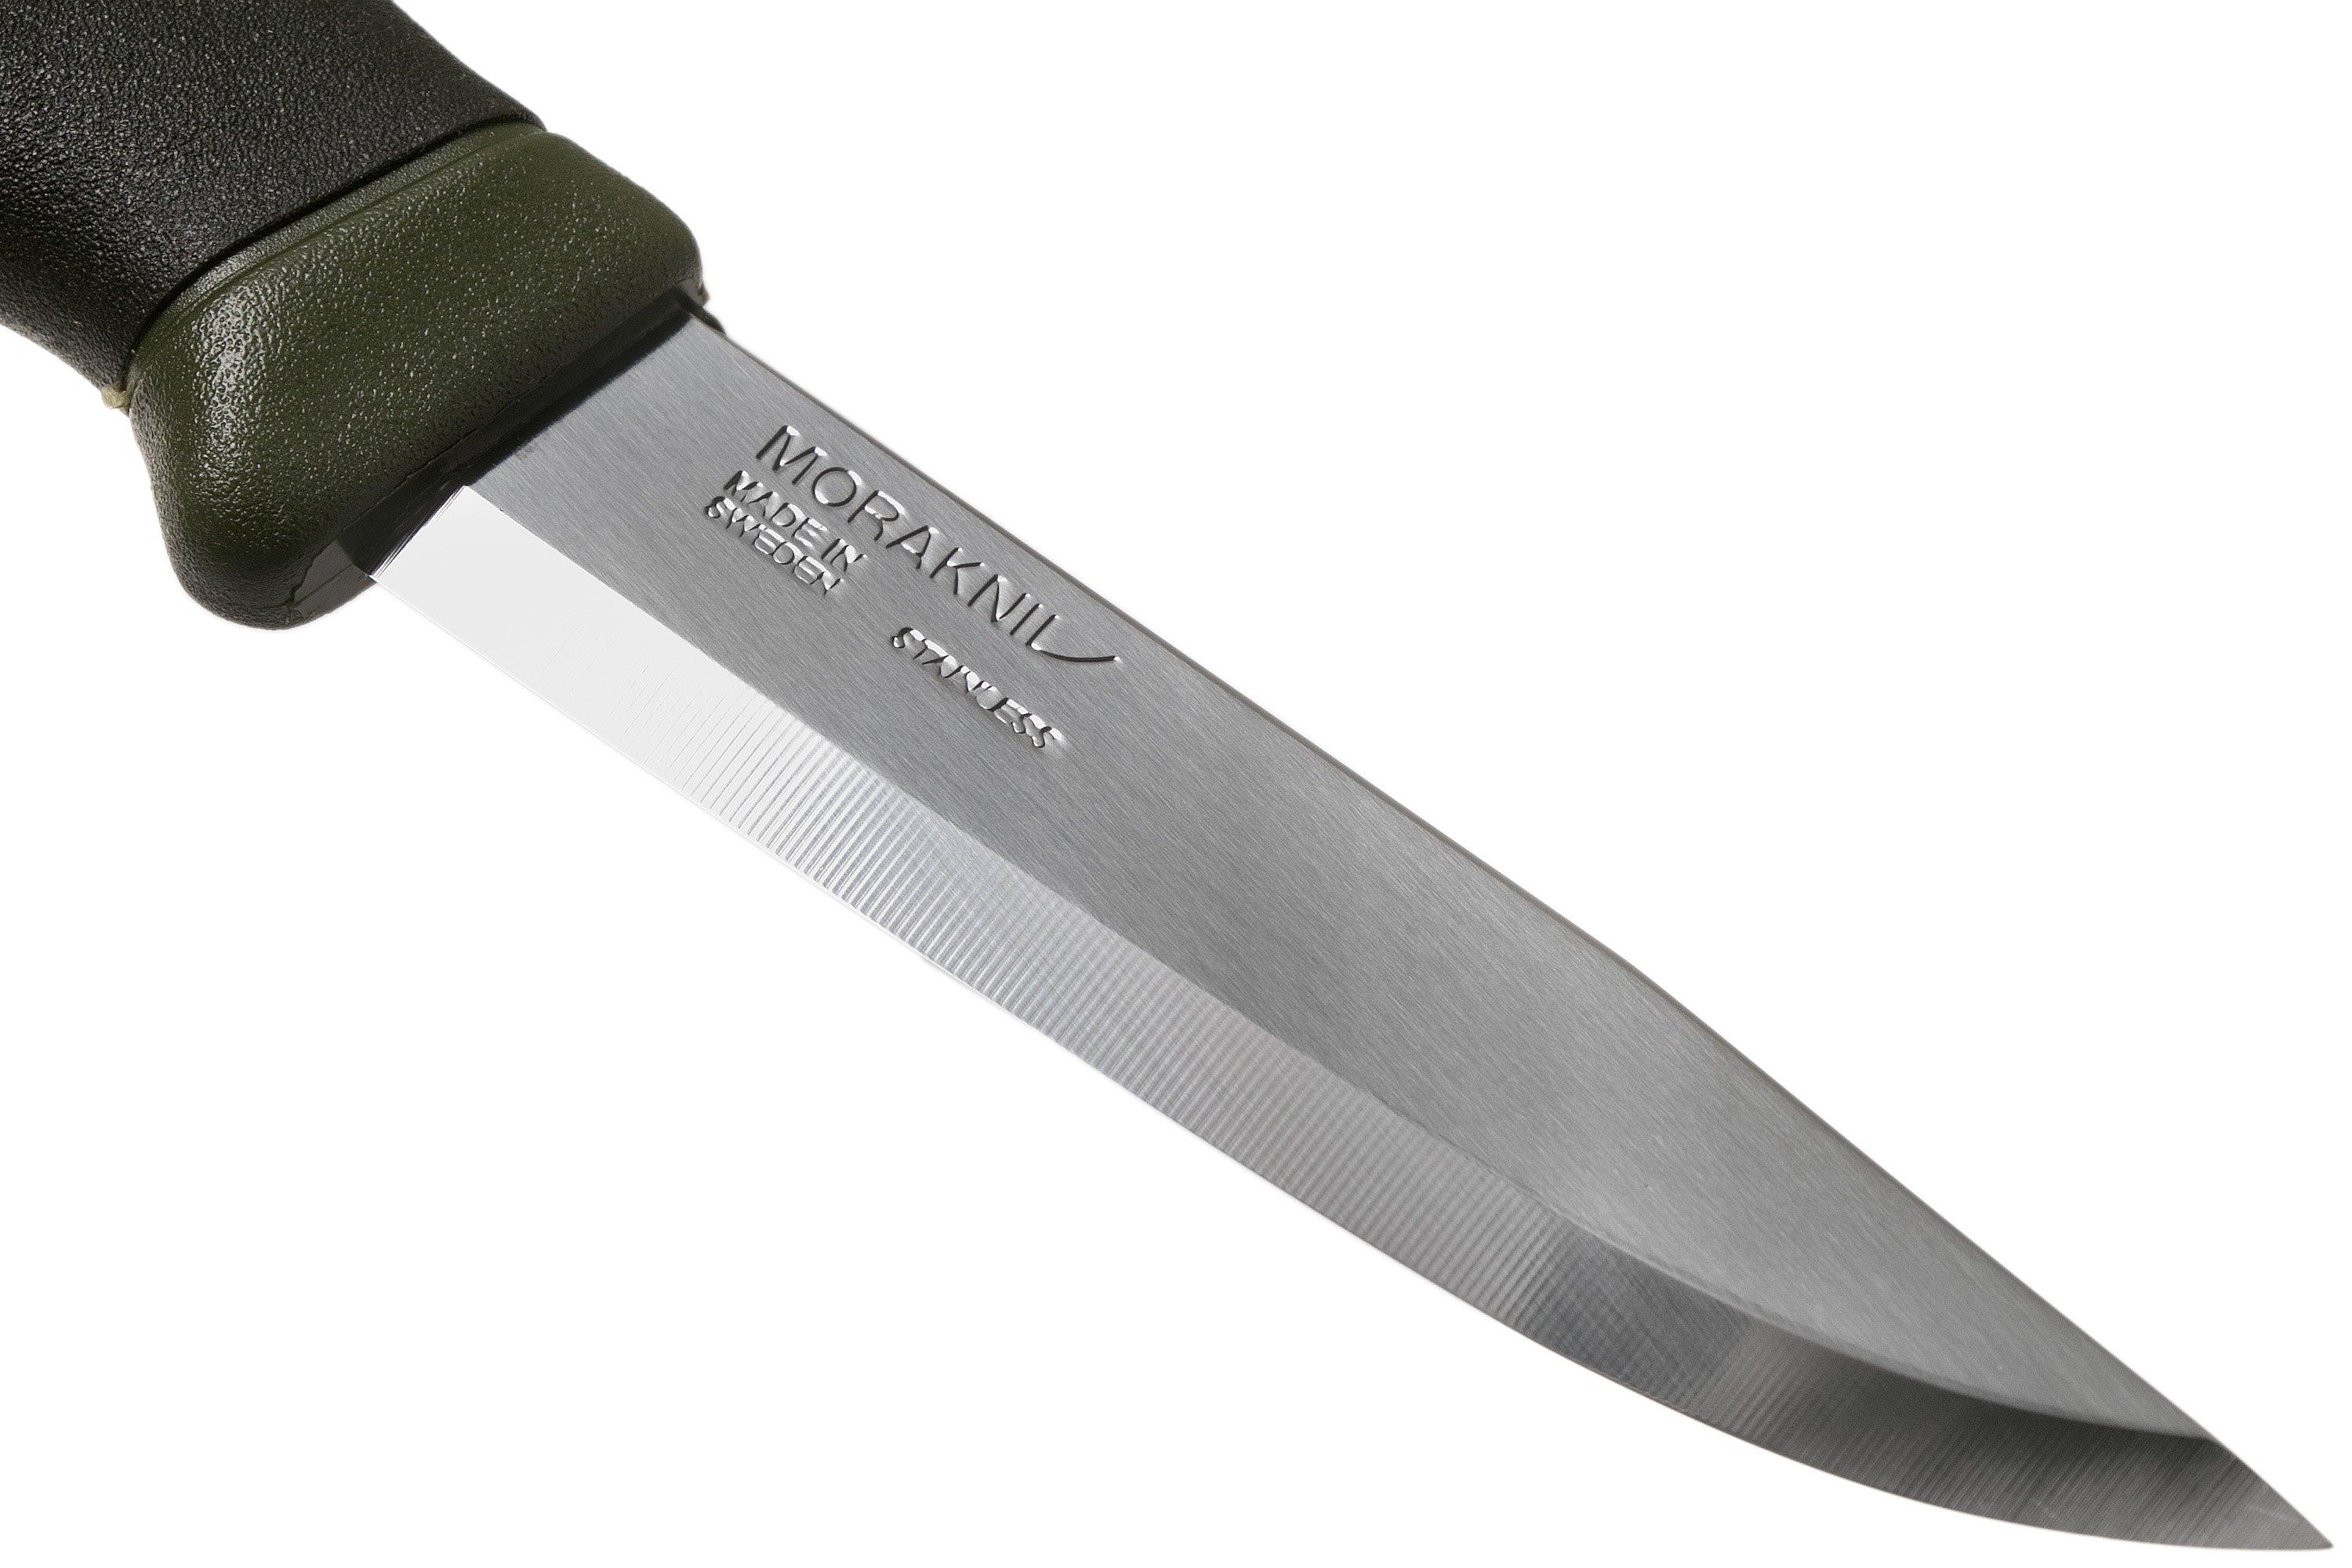 Mora Companion MG stainless, green | Advantageously shopping at .